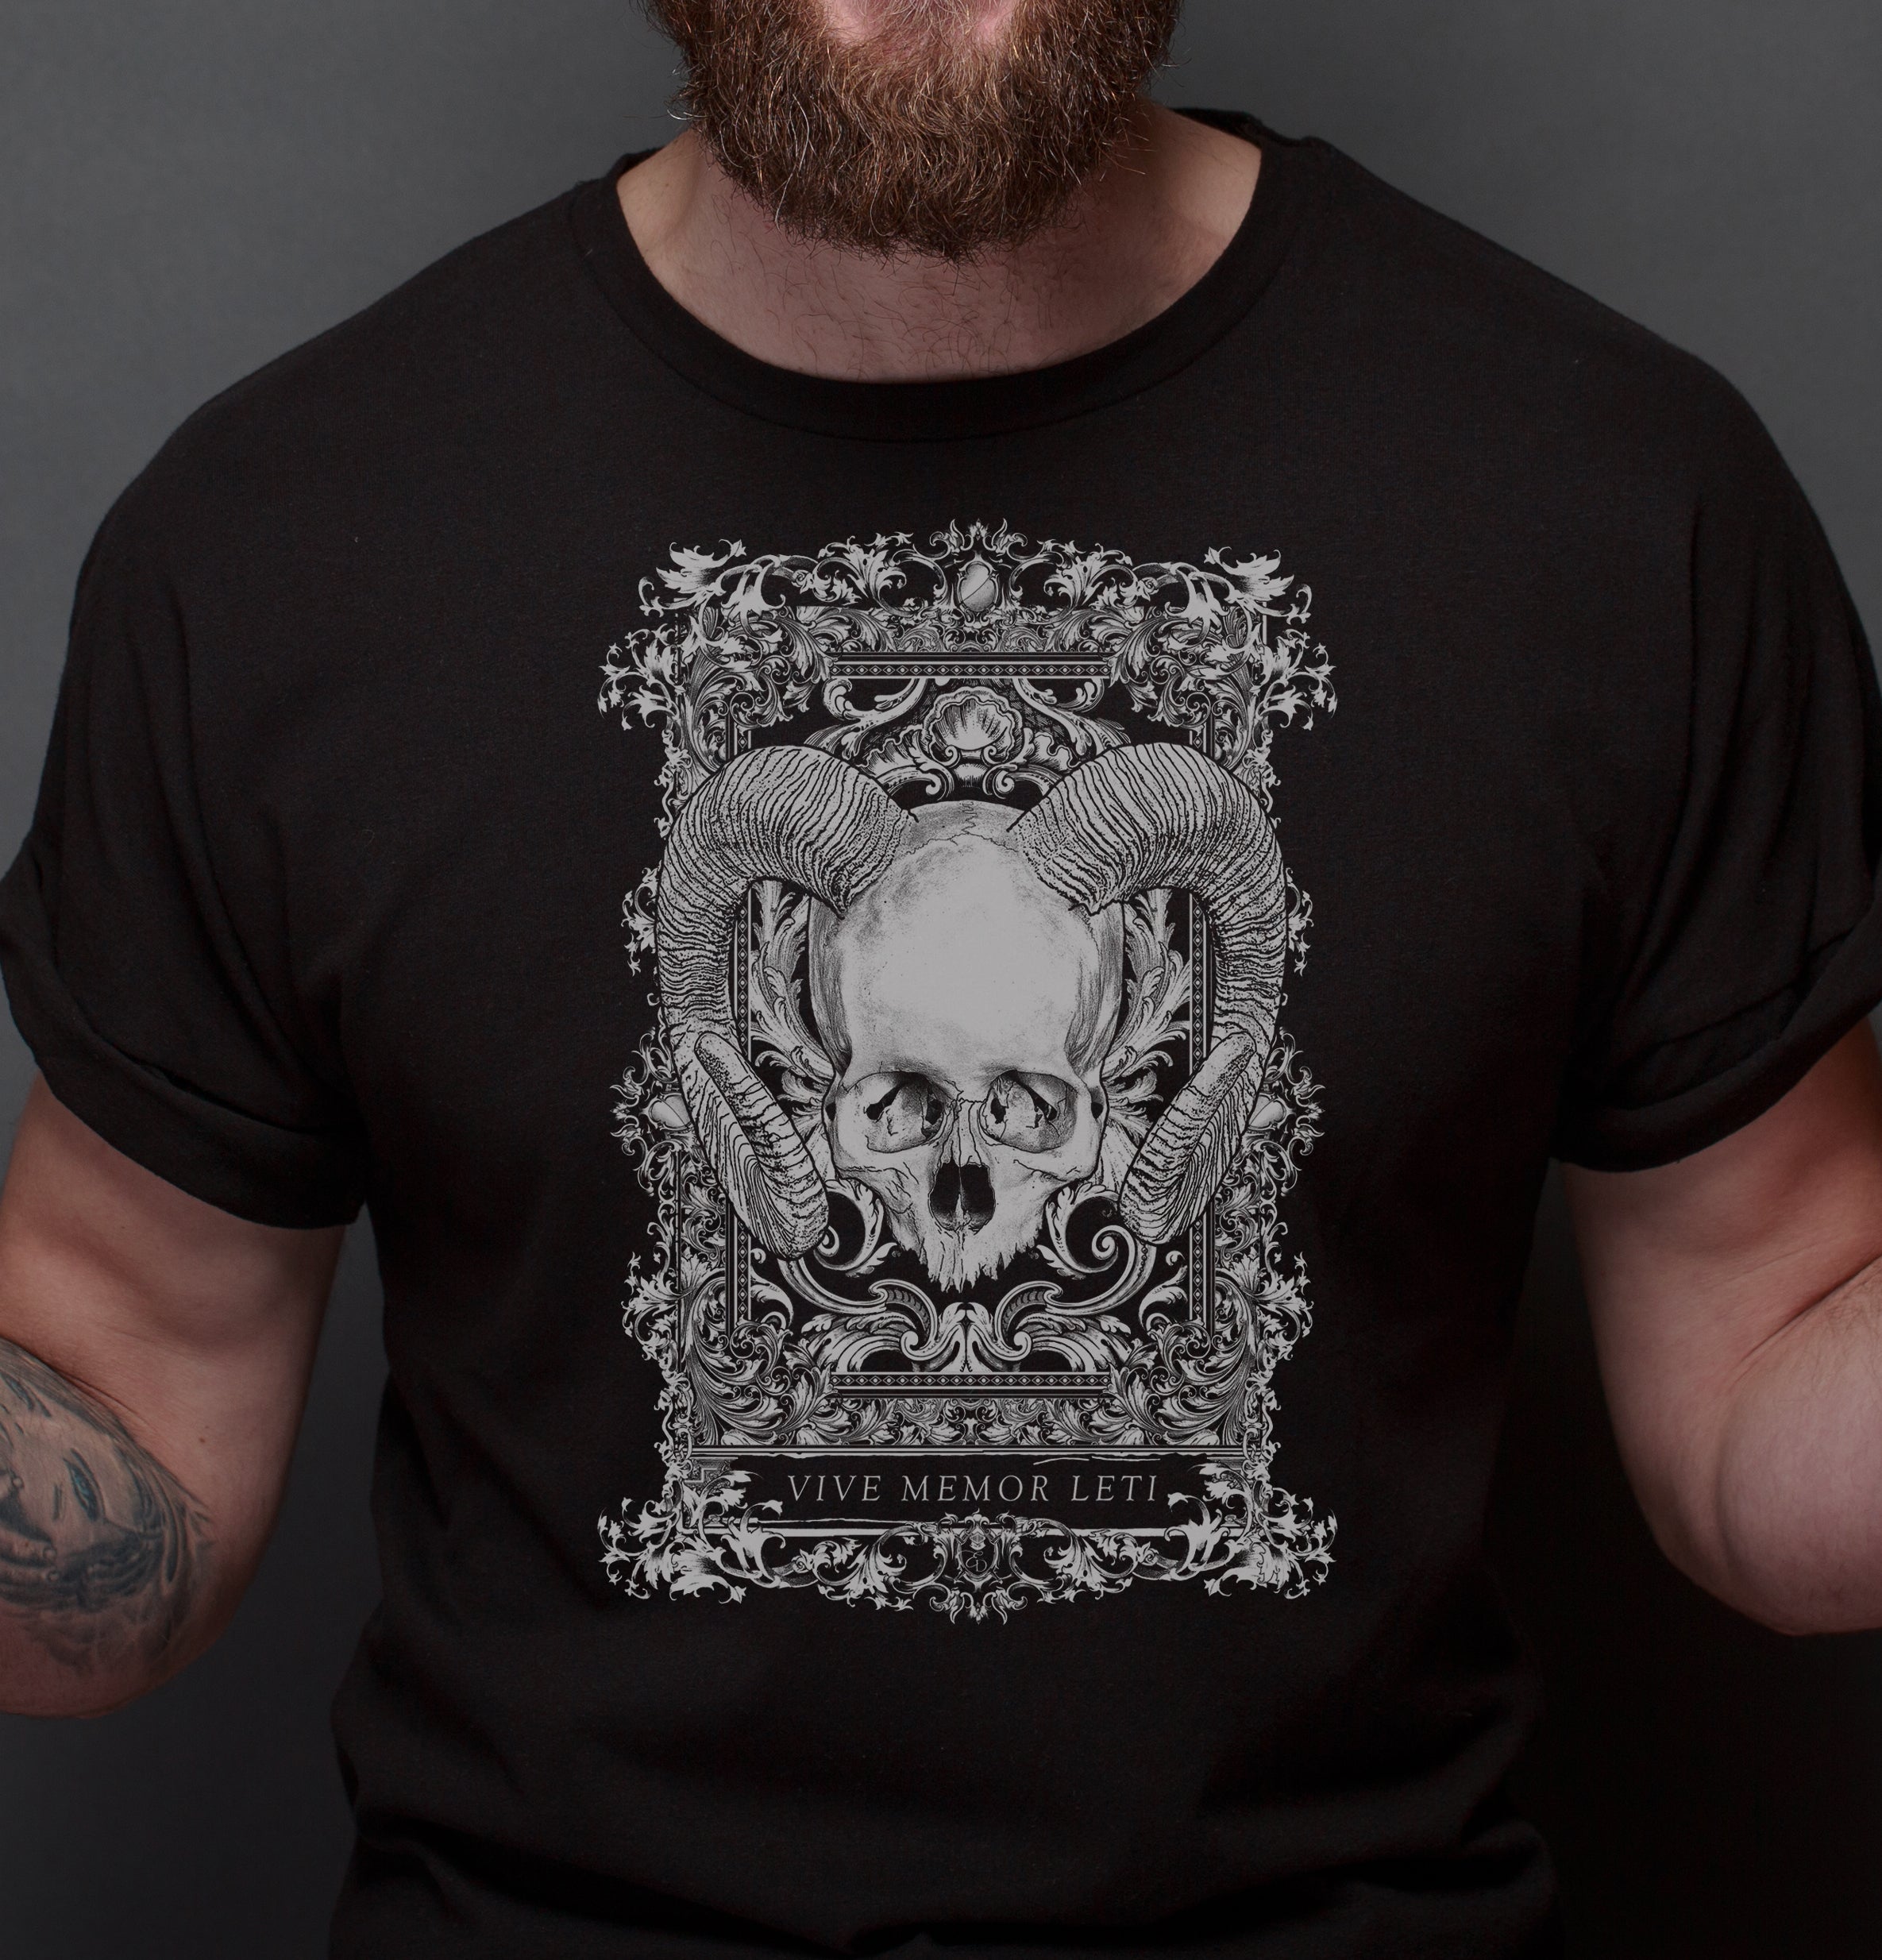 Dark Macabre Graphic Art T Shirt, Goth Clothing "The Damned"